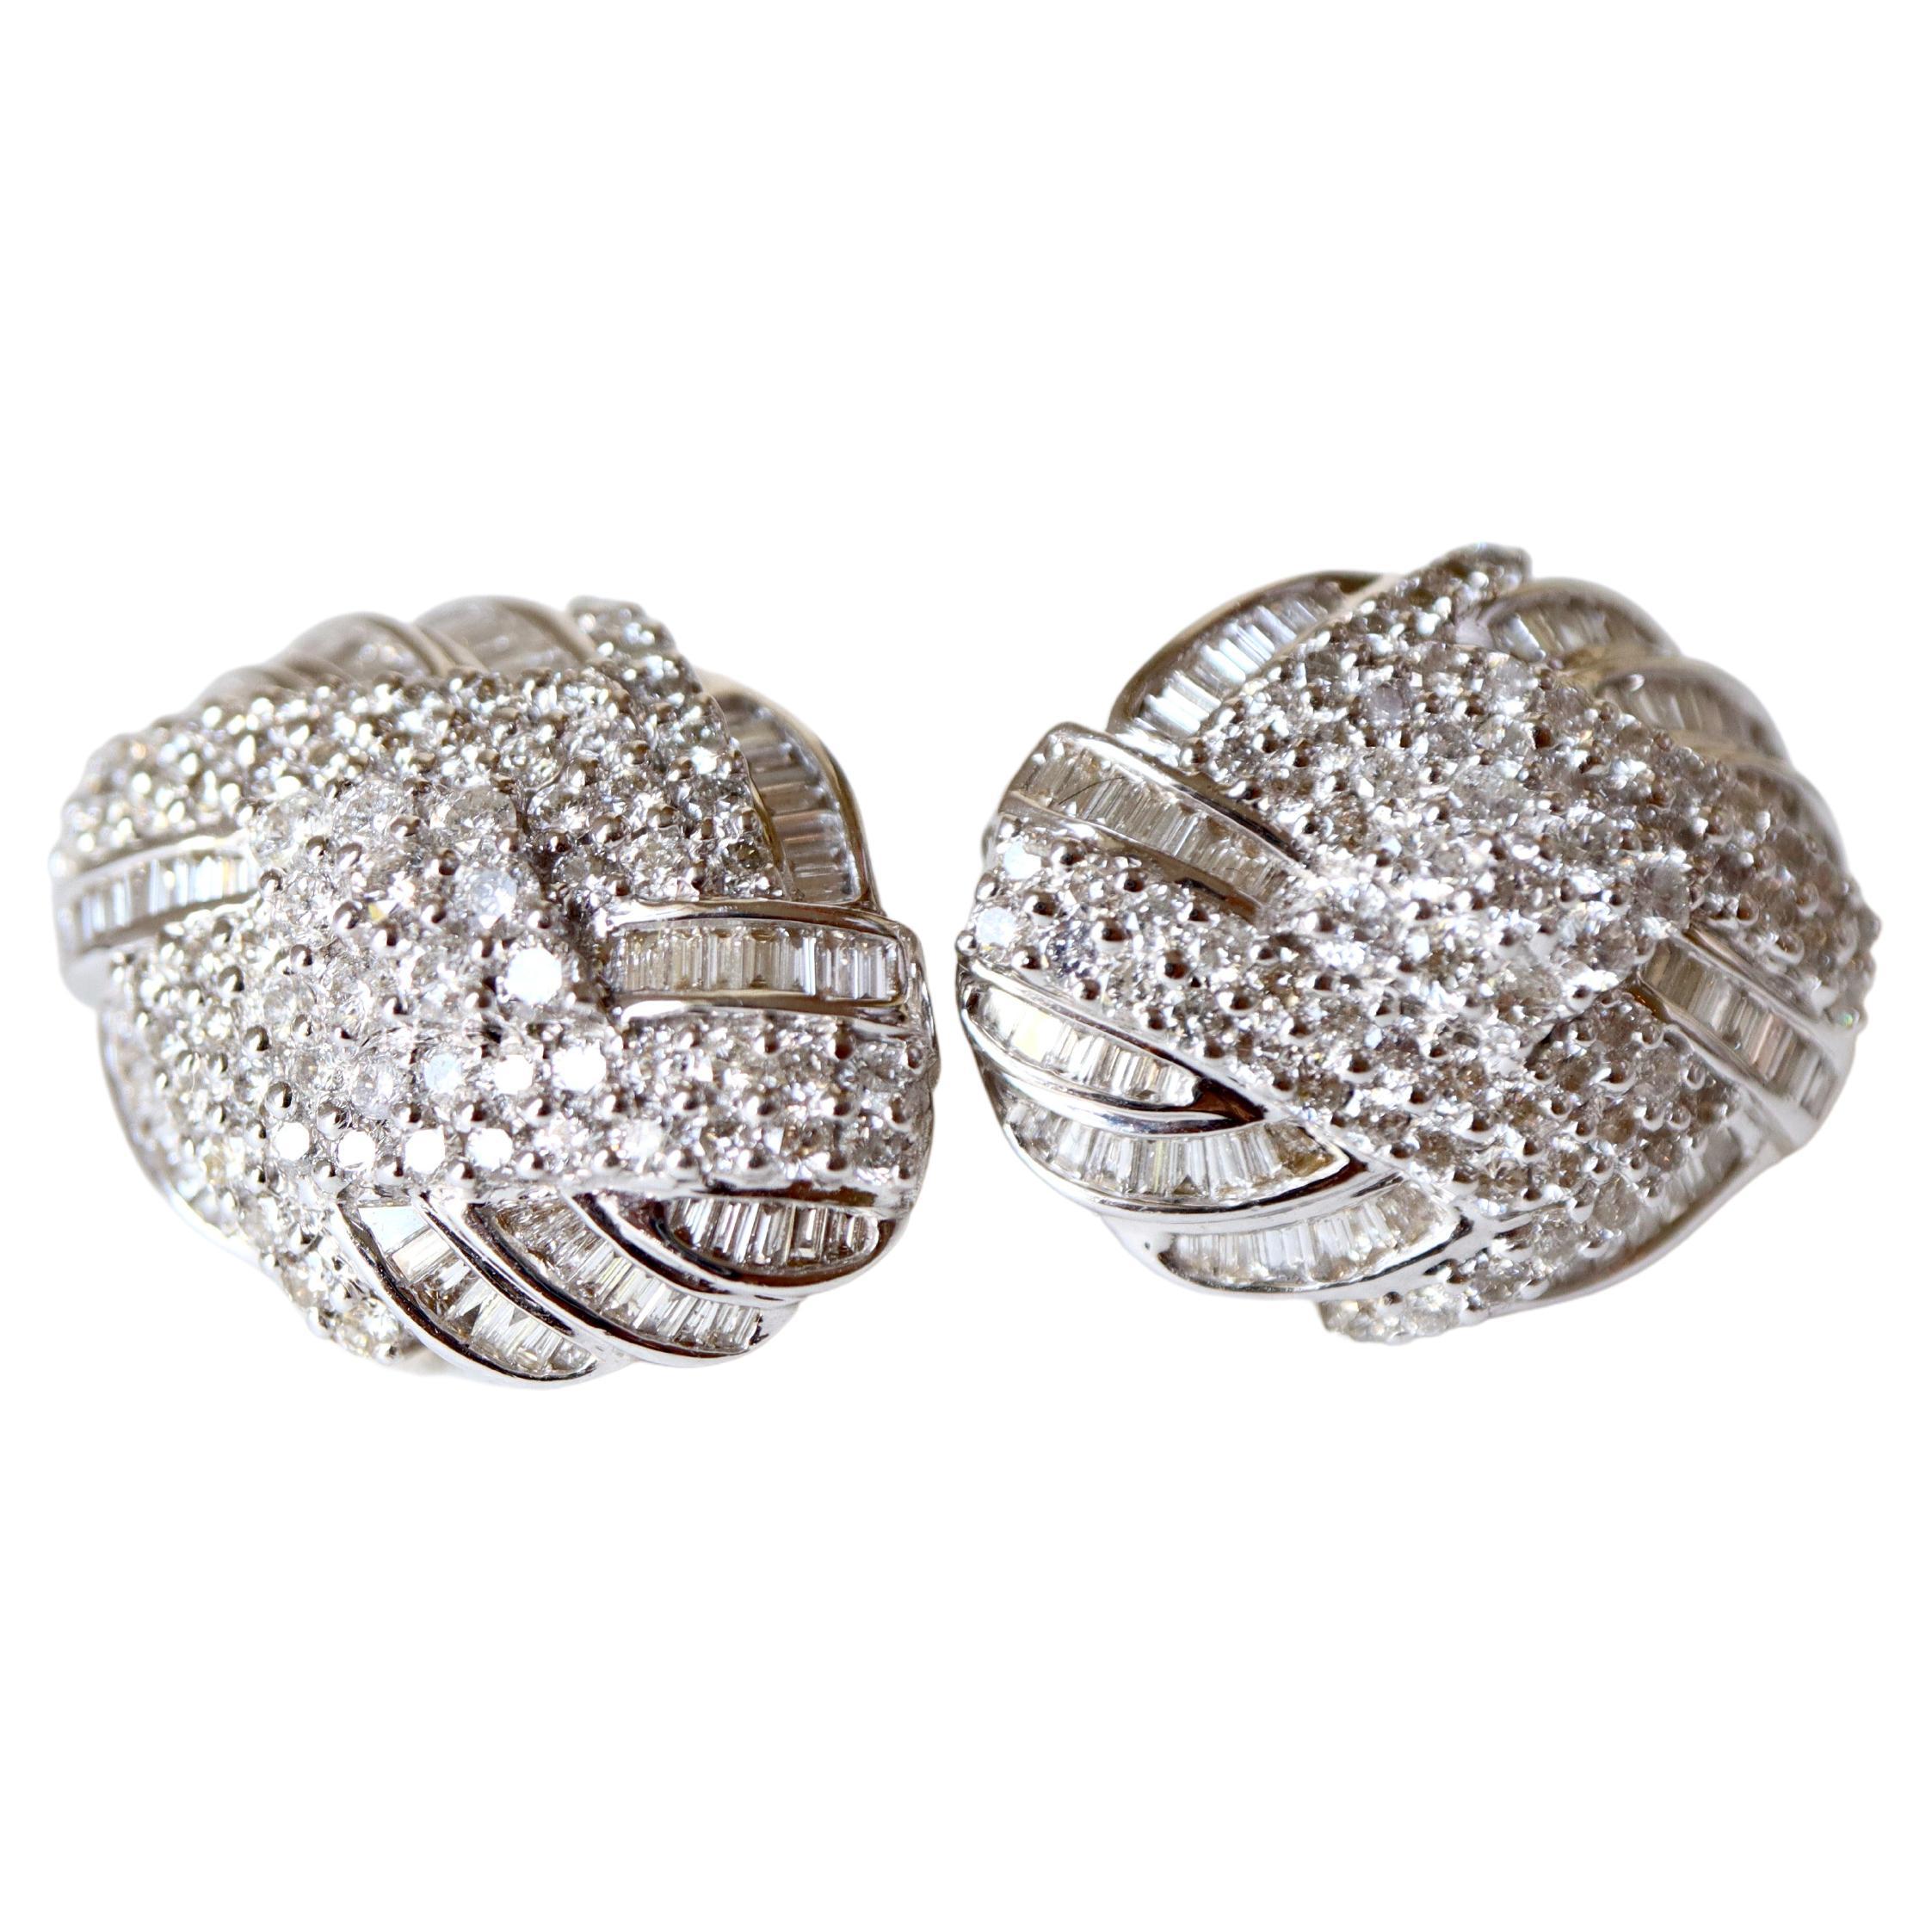 Diamonds Clip Earrings 18 Carat White Gold Set with 4 Carats of Diamonds For Sale